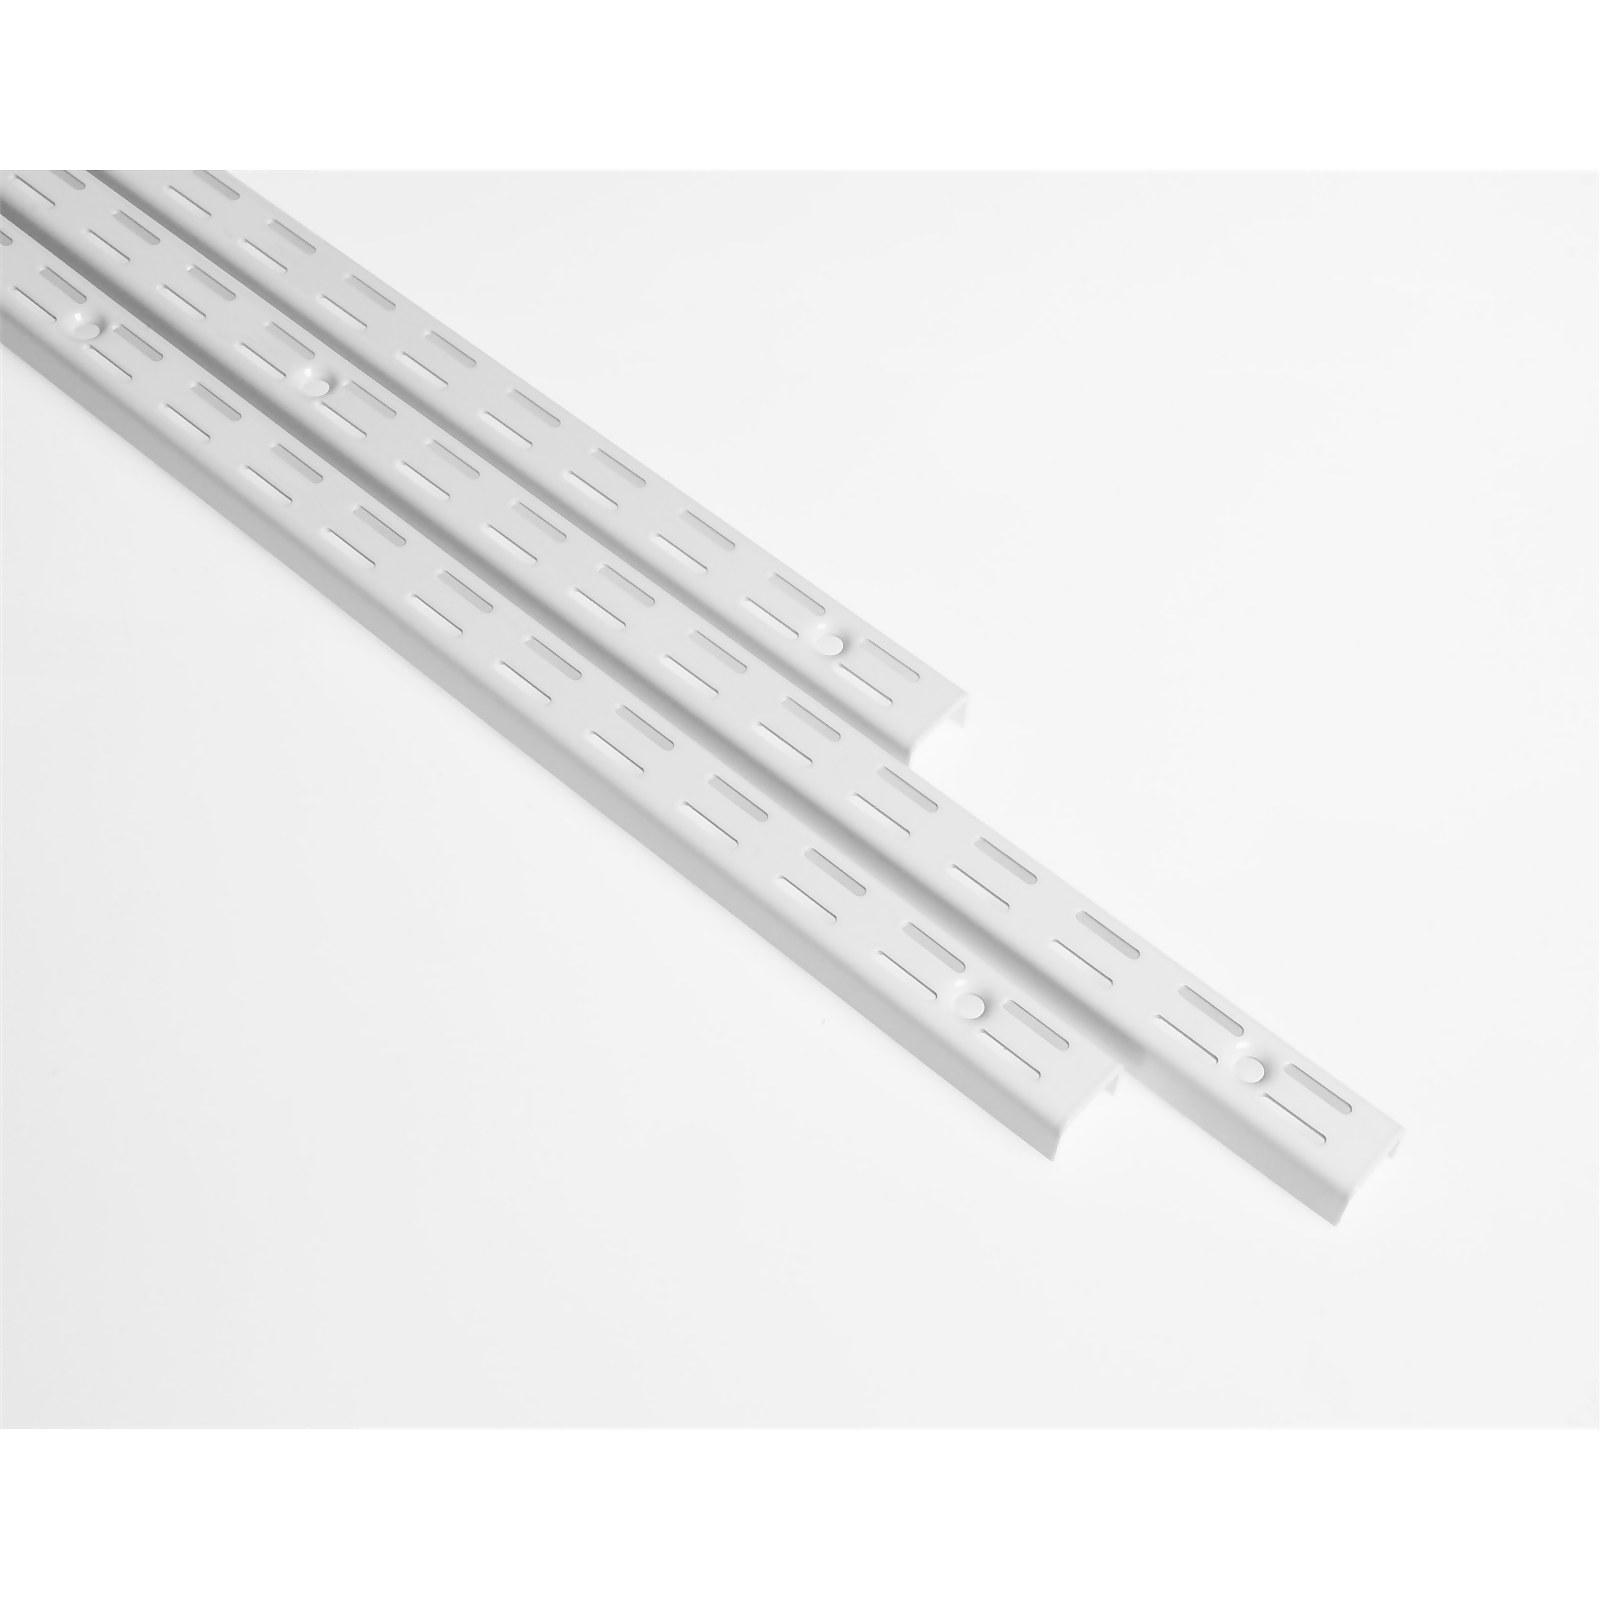 Photo of Anti-bacterial Twin Slot Shelving Kit - 1600mm White Twinslot And 216mm Brackets - White